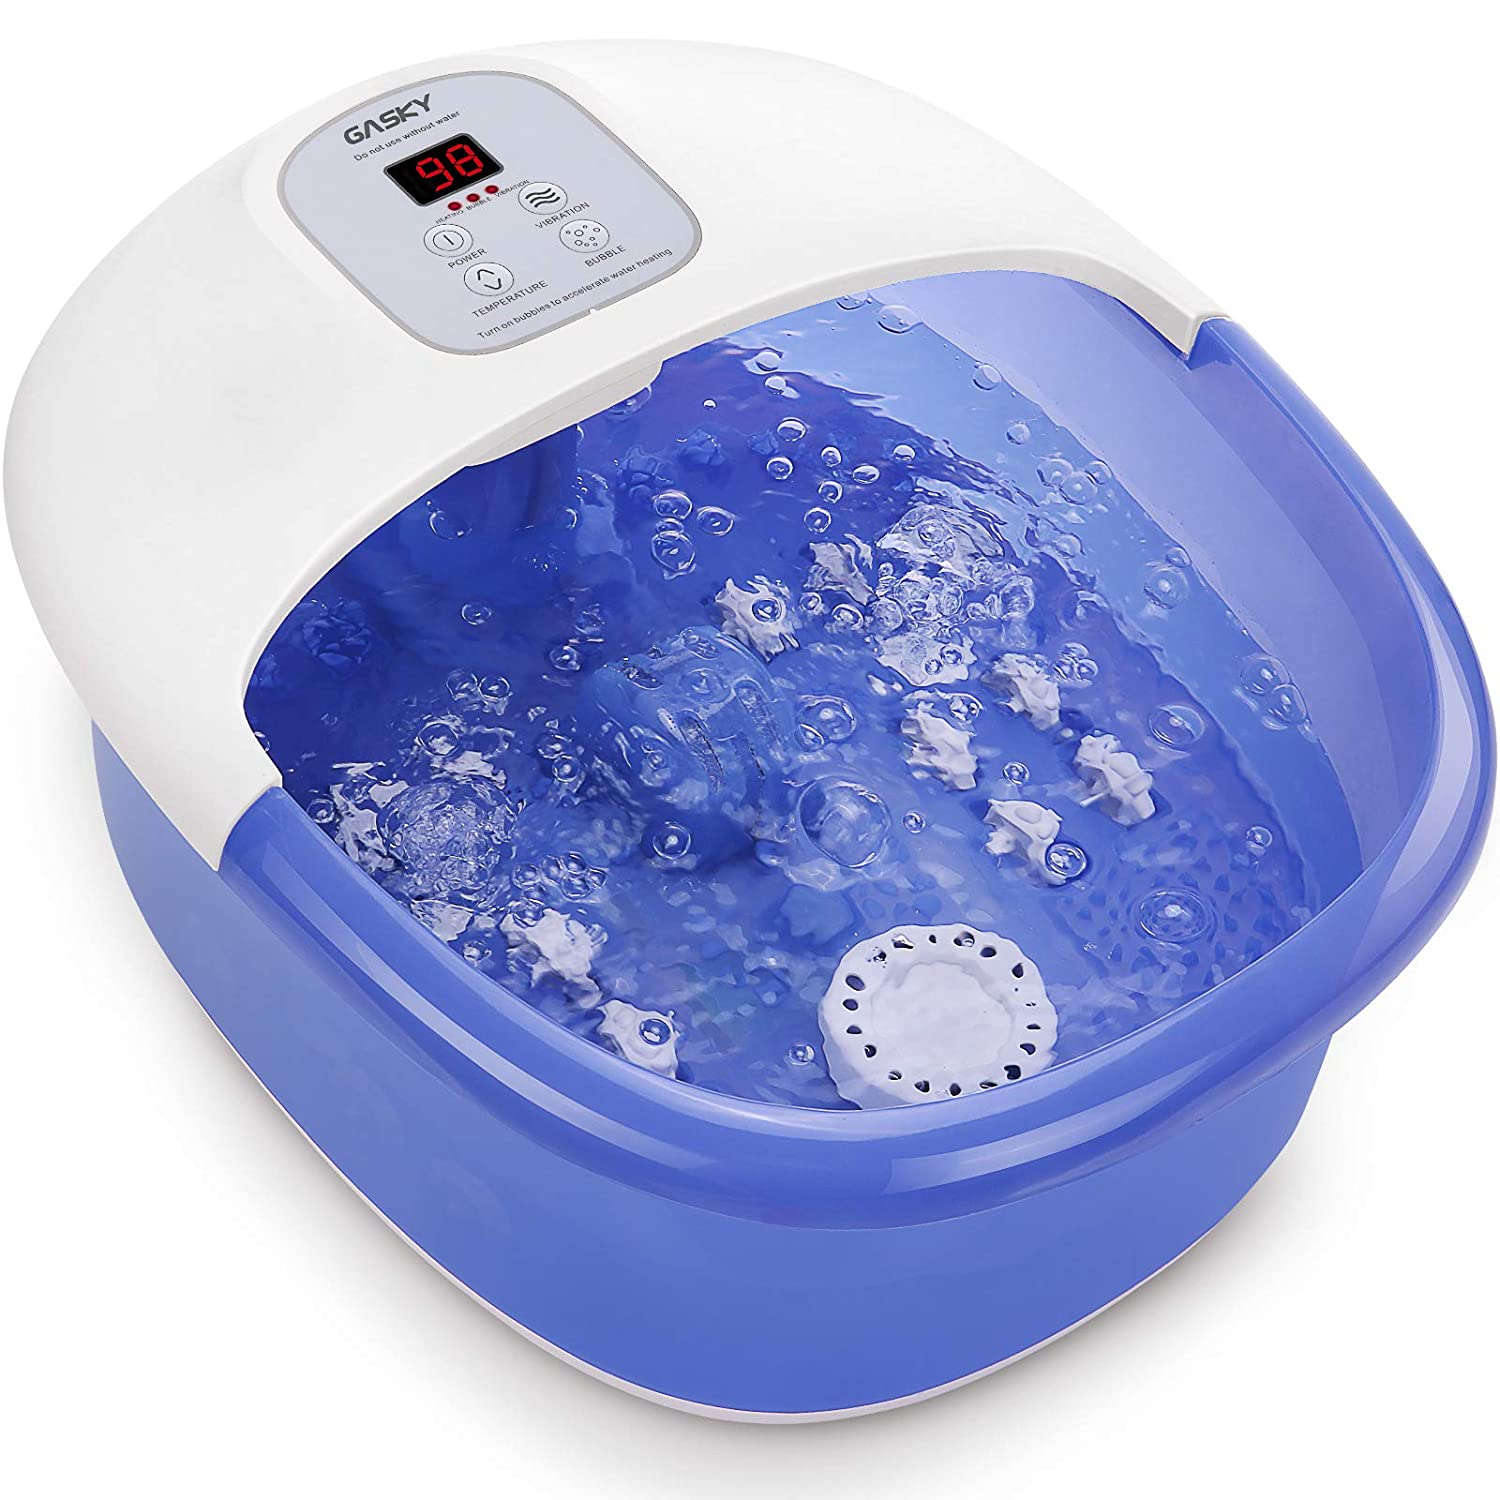 Maxkare Foot Spa Bath Massager 3-Speed Frequency Conversion Heat - 20424829